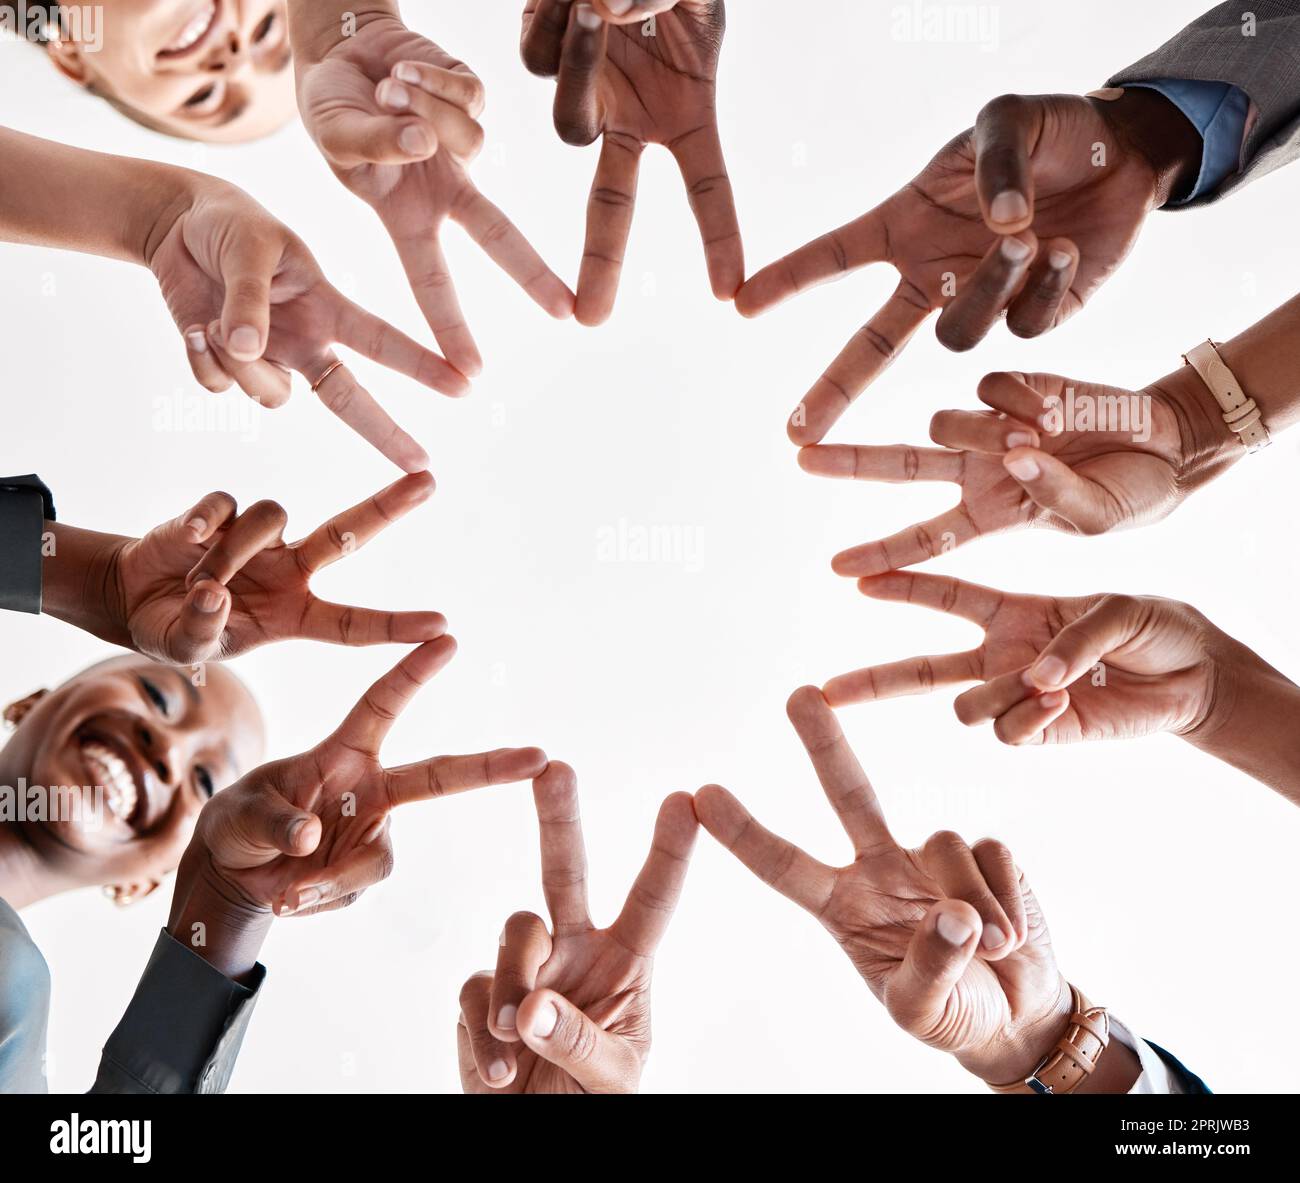 Teamwork, collaboration and star hand sign of business people for goal, mission and achievement success. Group diversity hands together with v sign or peace symbol for unity, trust and support below Stock Photo